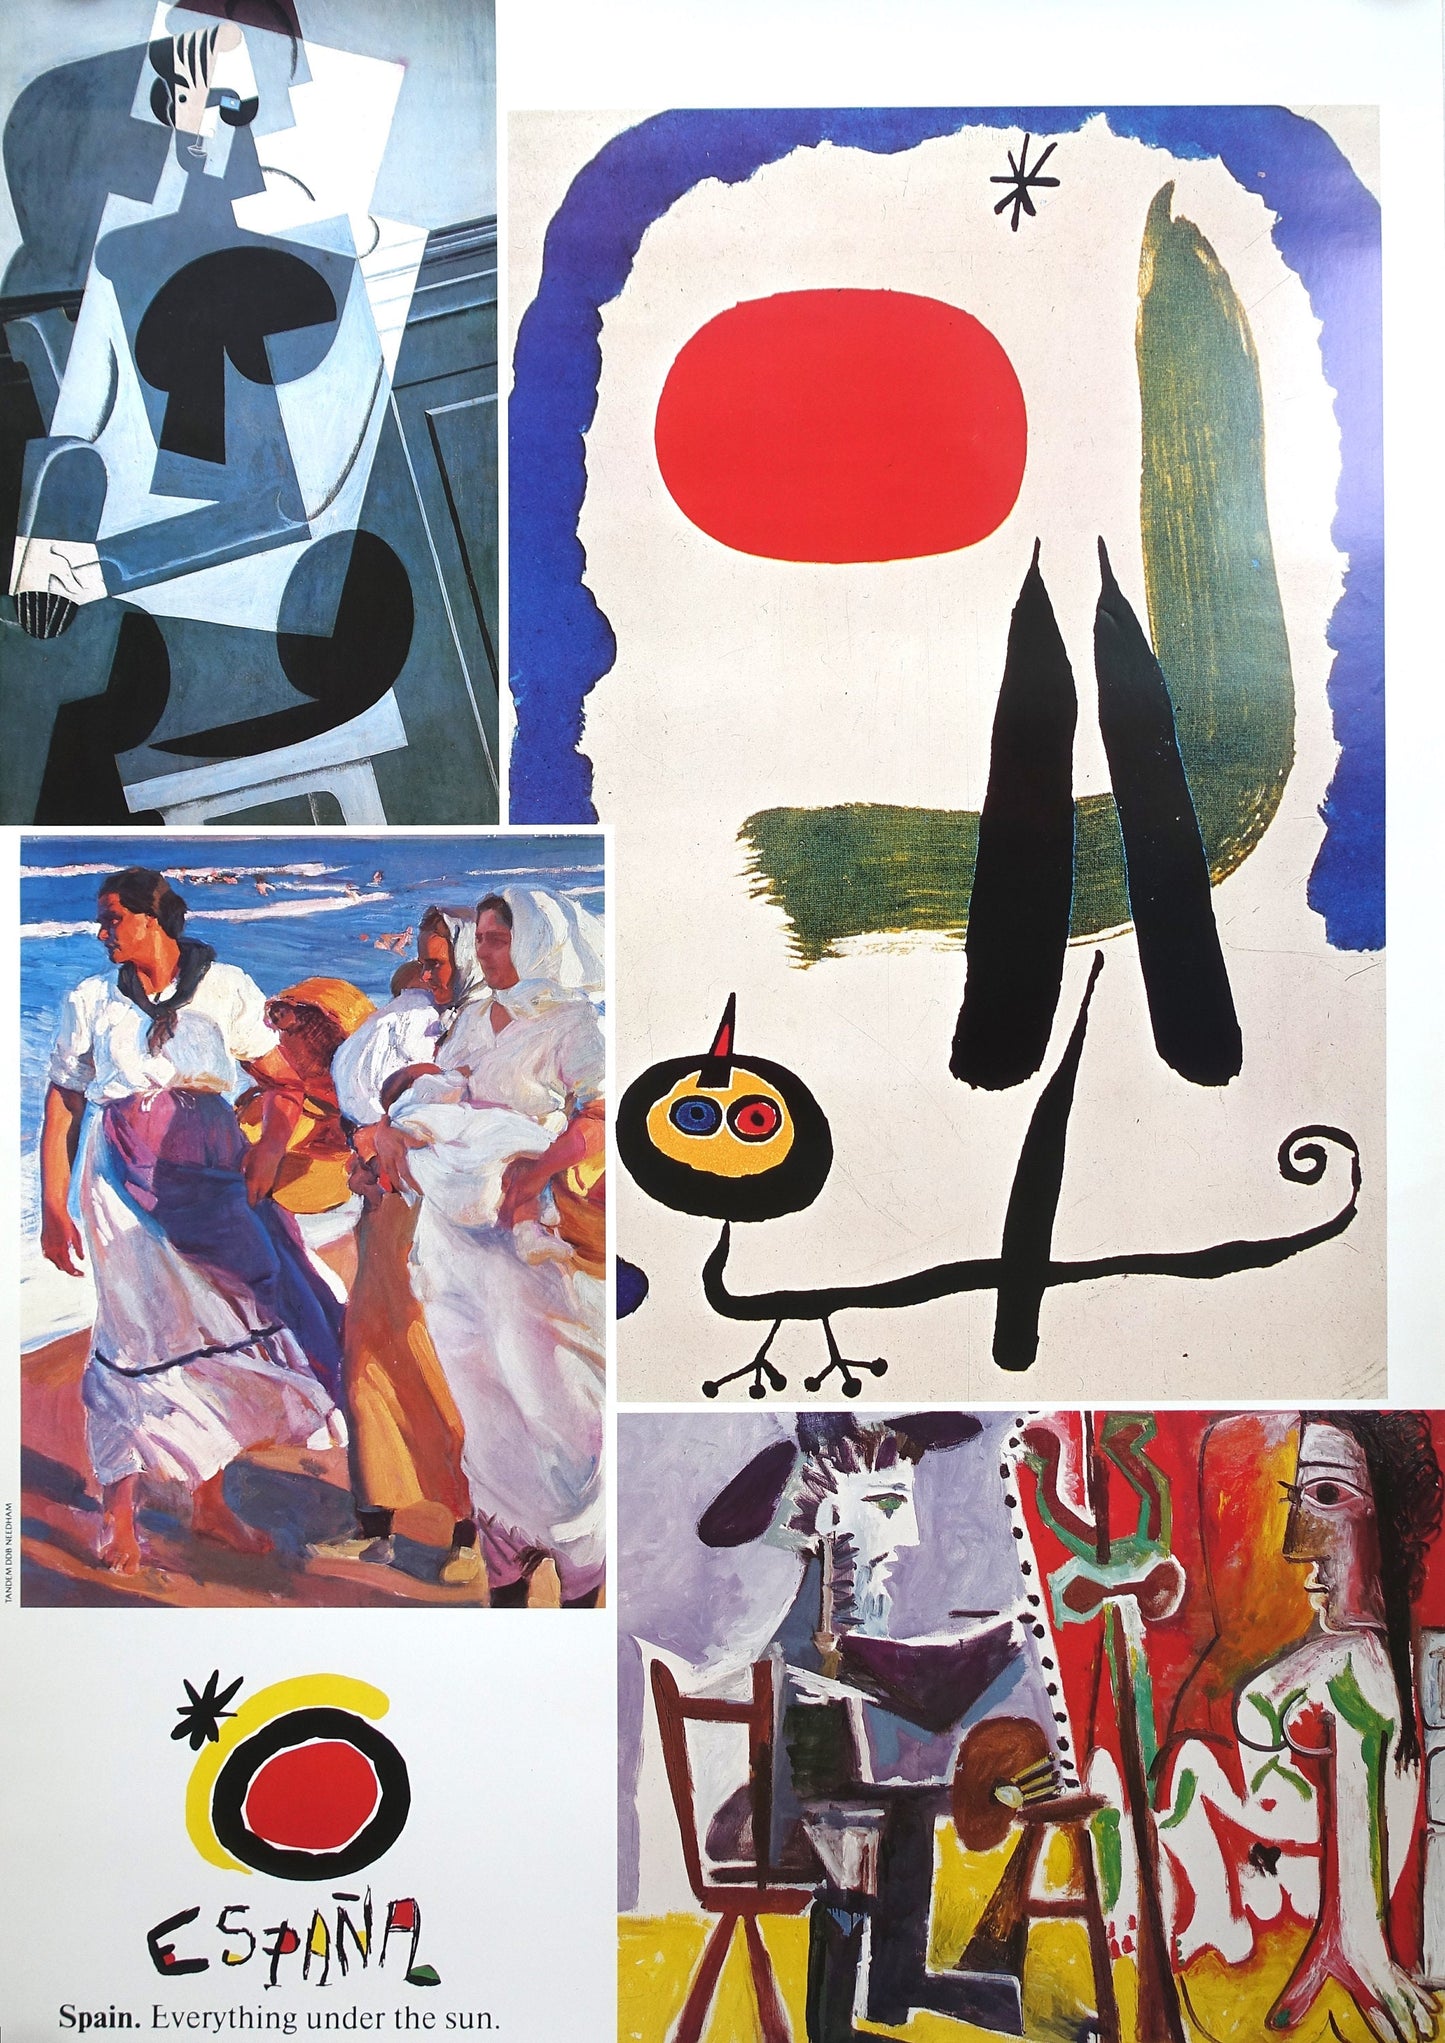 1987 Spain Travel Poster by Miro & Picasso - Original Vintage Poster